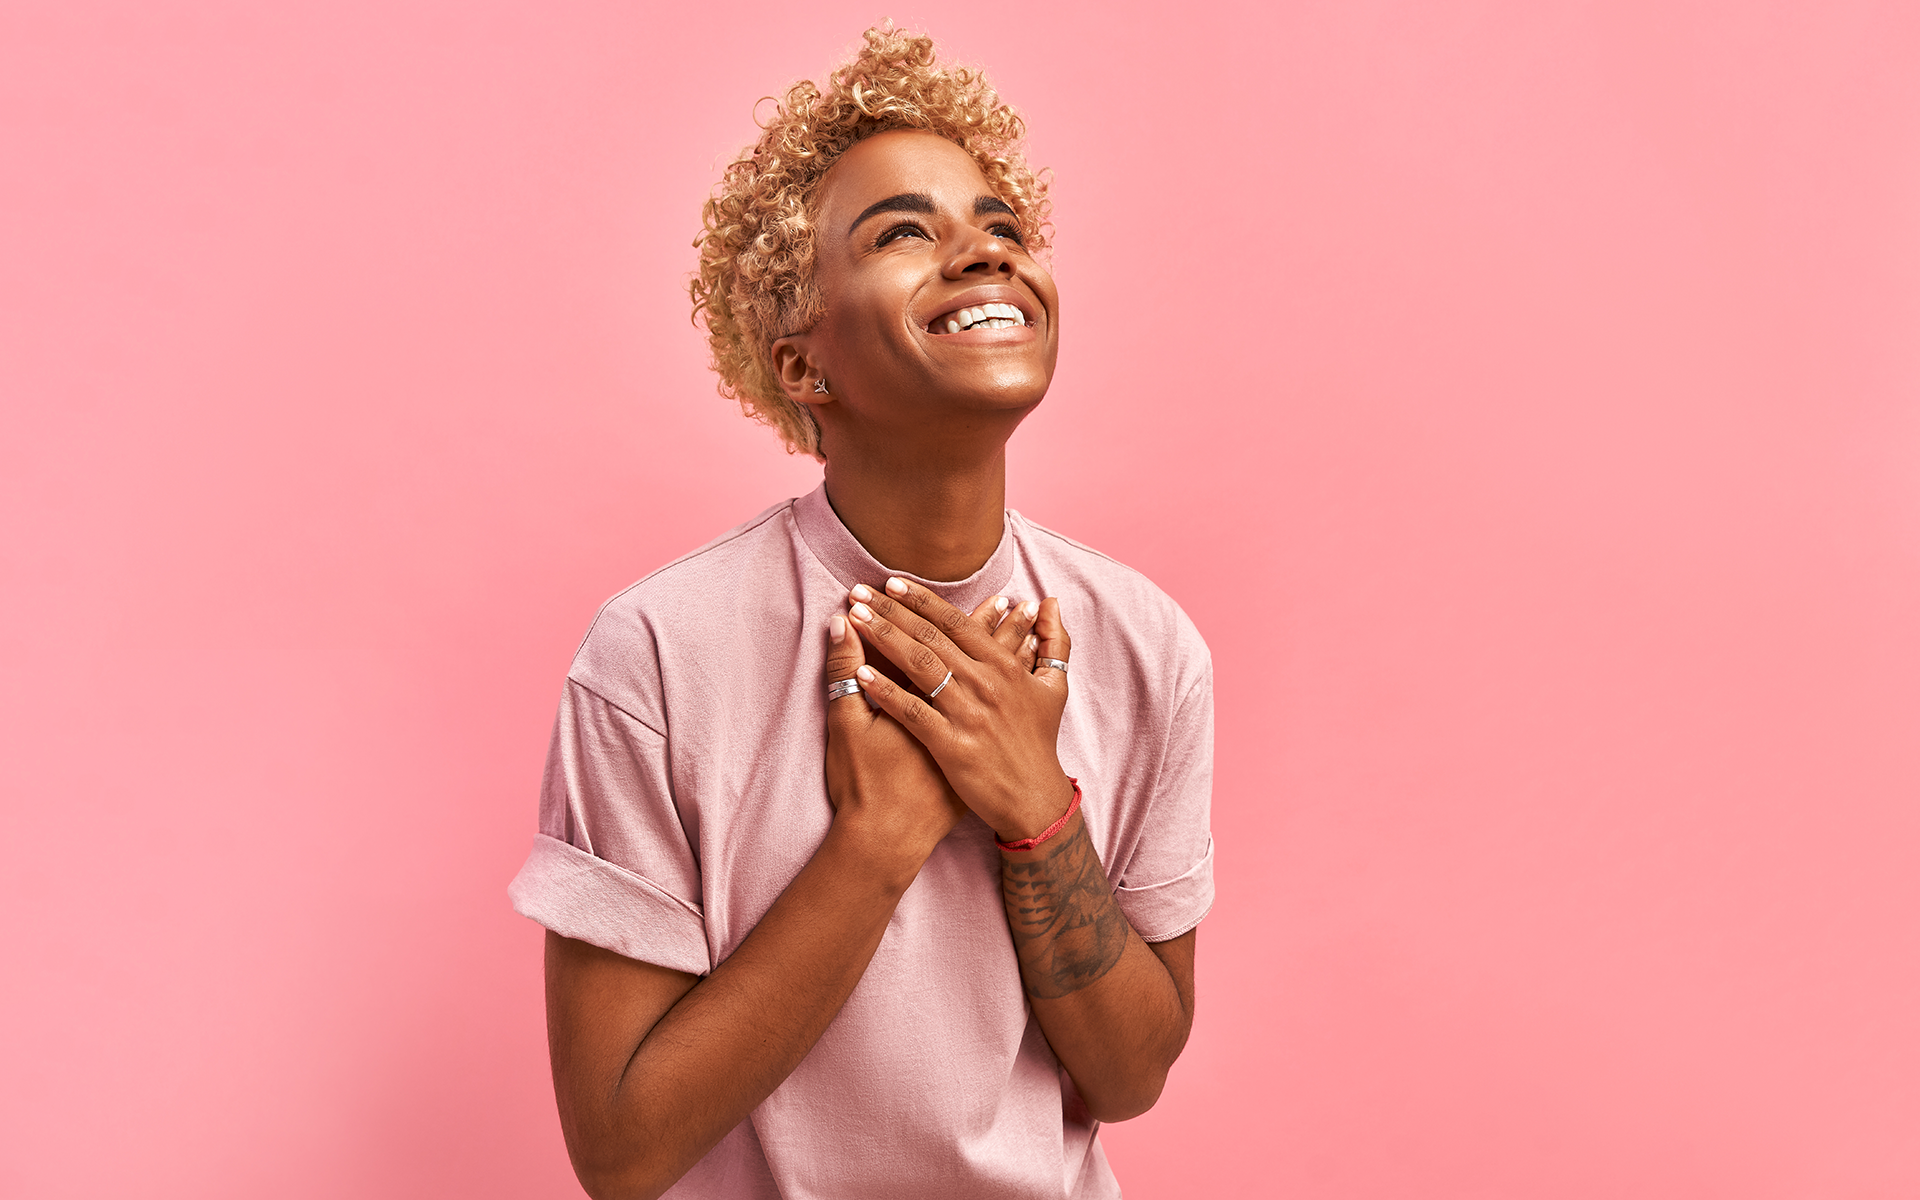 5 Gratitude Meditations to Fill Your Heart with the Joy of Giving Thanks—A smiling Black person with short blonde hair and a pink T-shirt on holds their hands on their chest in front of a pink studio background